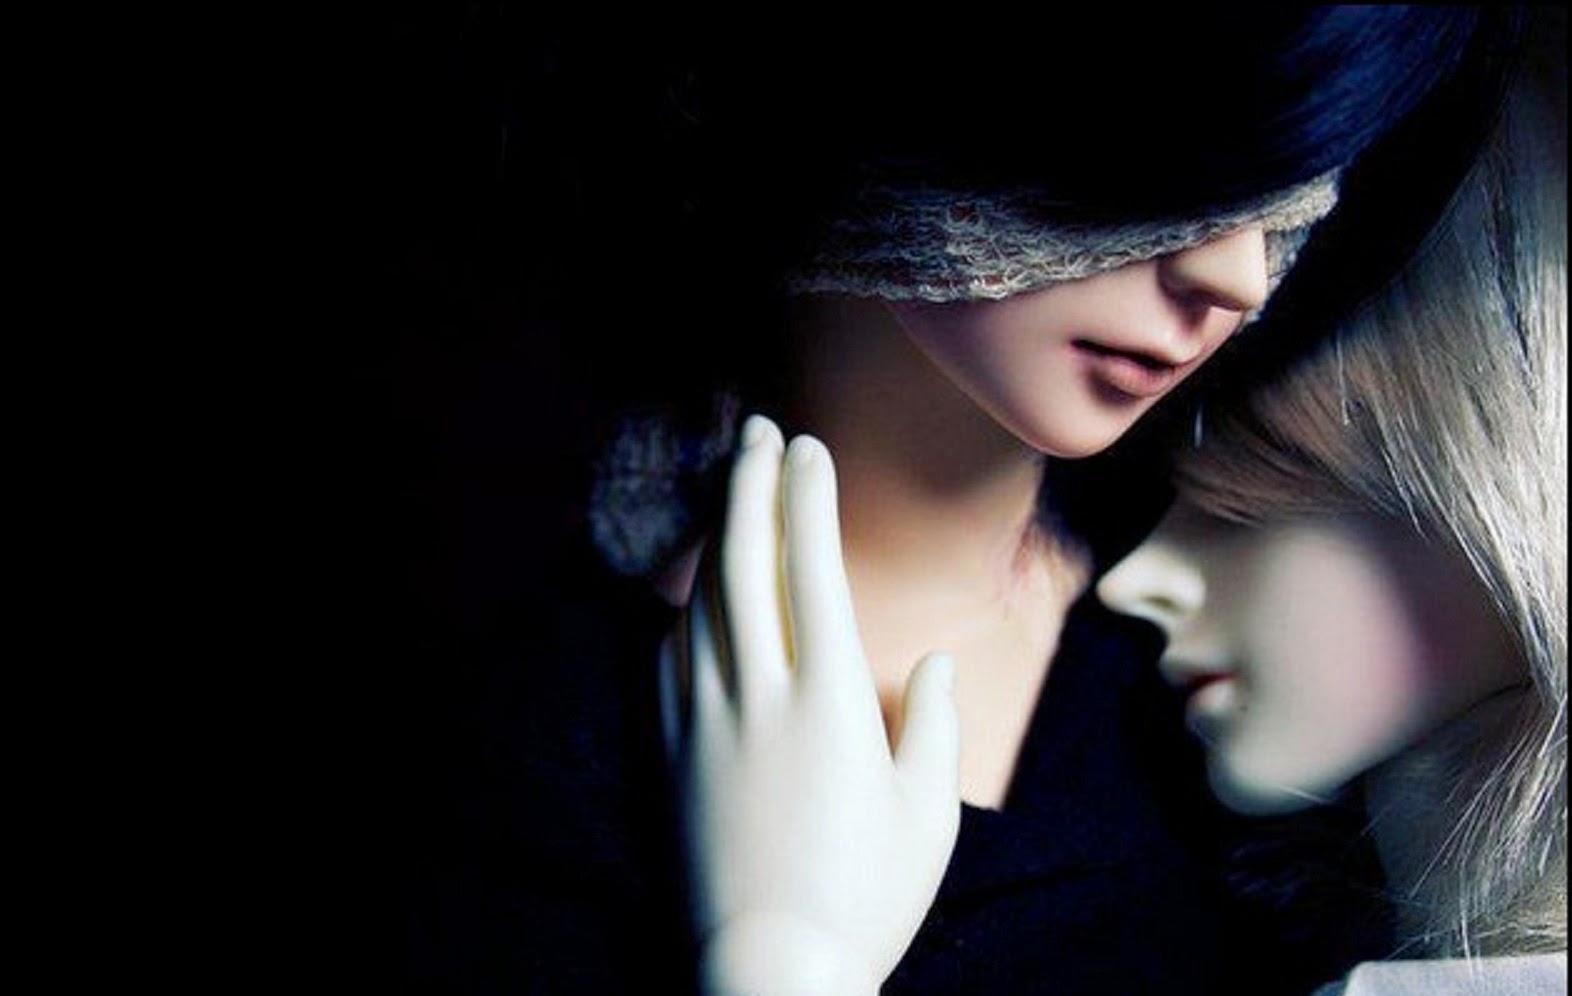  Cute  Couple  Dolls  Images For Facebook Cover Photo 